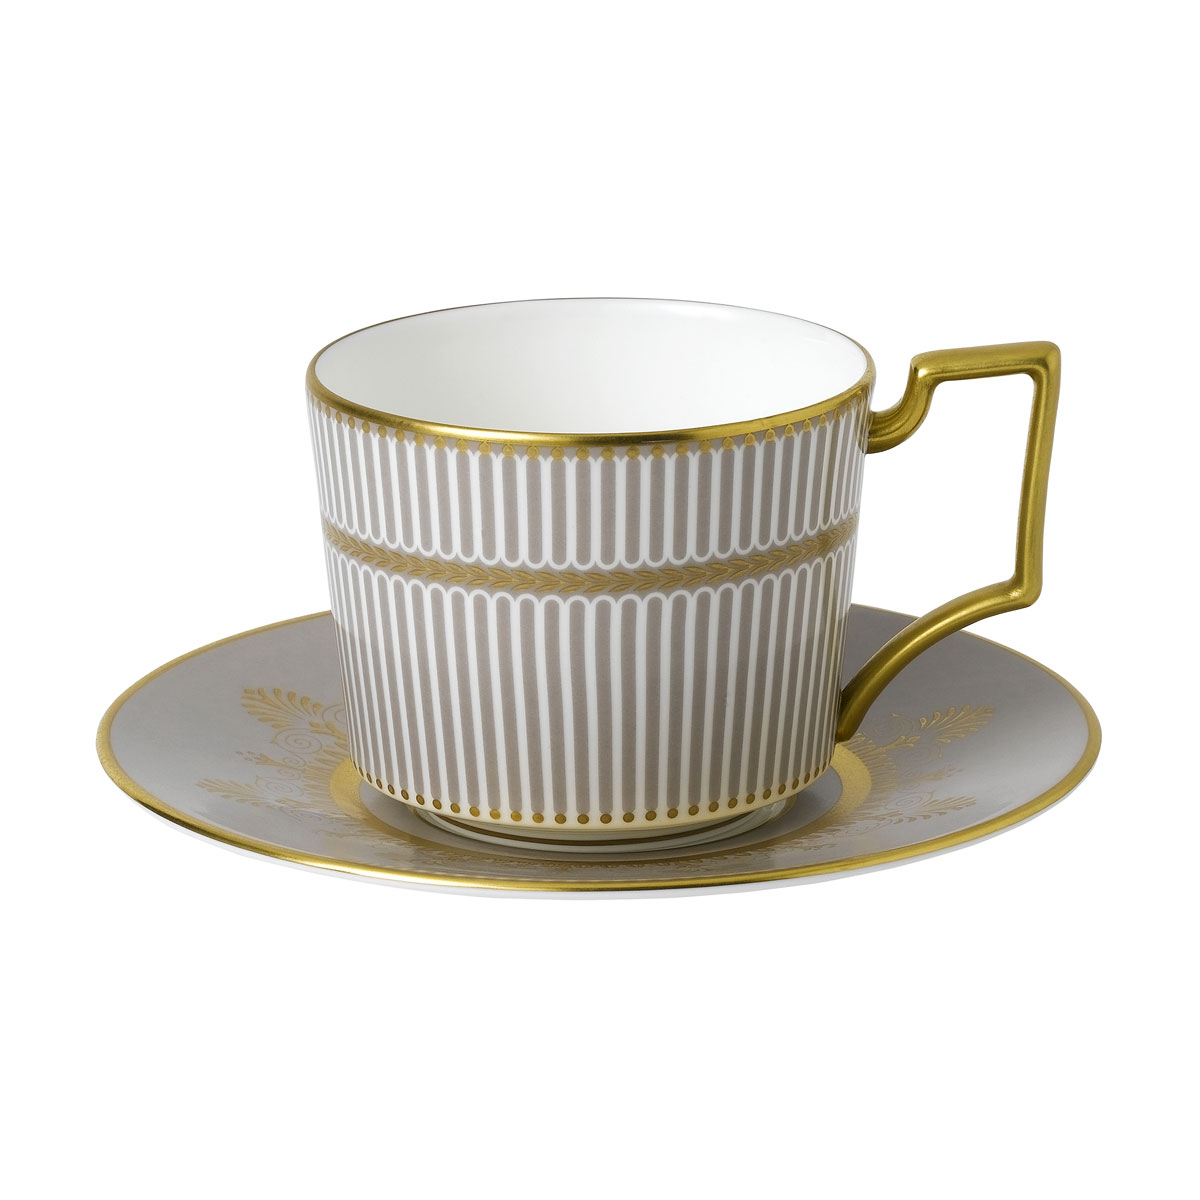 Wedgwood Anthemion Grey Teacup and Saucer